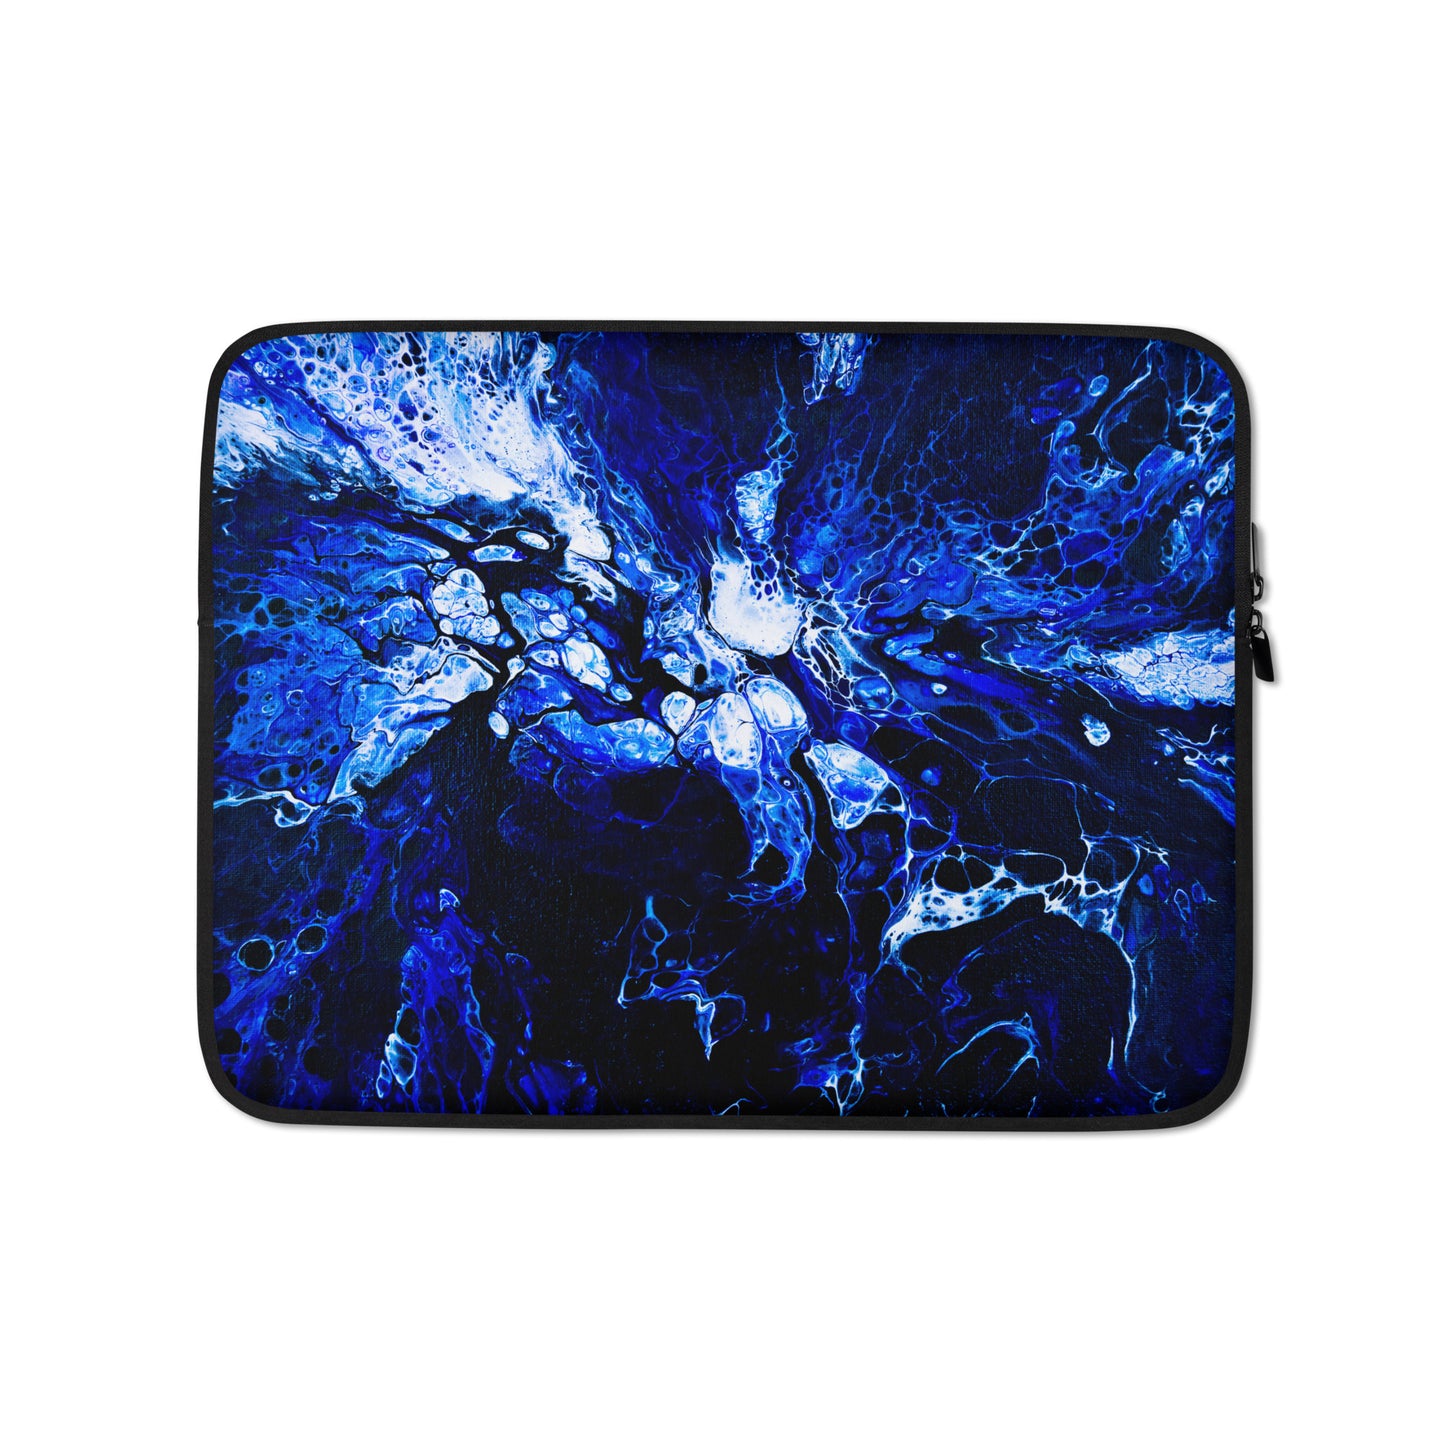 NightOwl Studio Padded Laptop Sleeve with Faux Fur Lining, 13 and 15 Inch Covers for Portable Computers and Large Tablets, Slim and Portable Neoprene for Work, Travel, or Gaming, Blue Burst